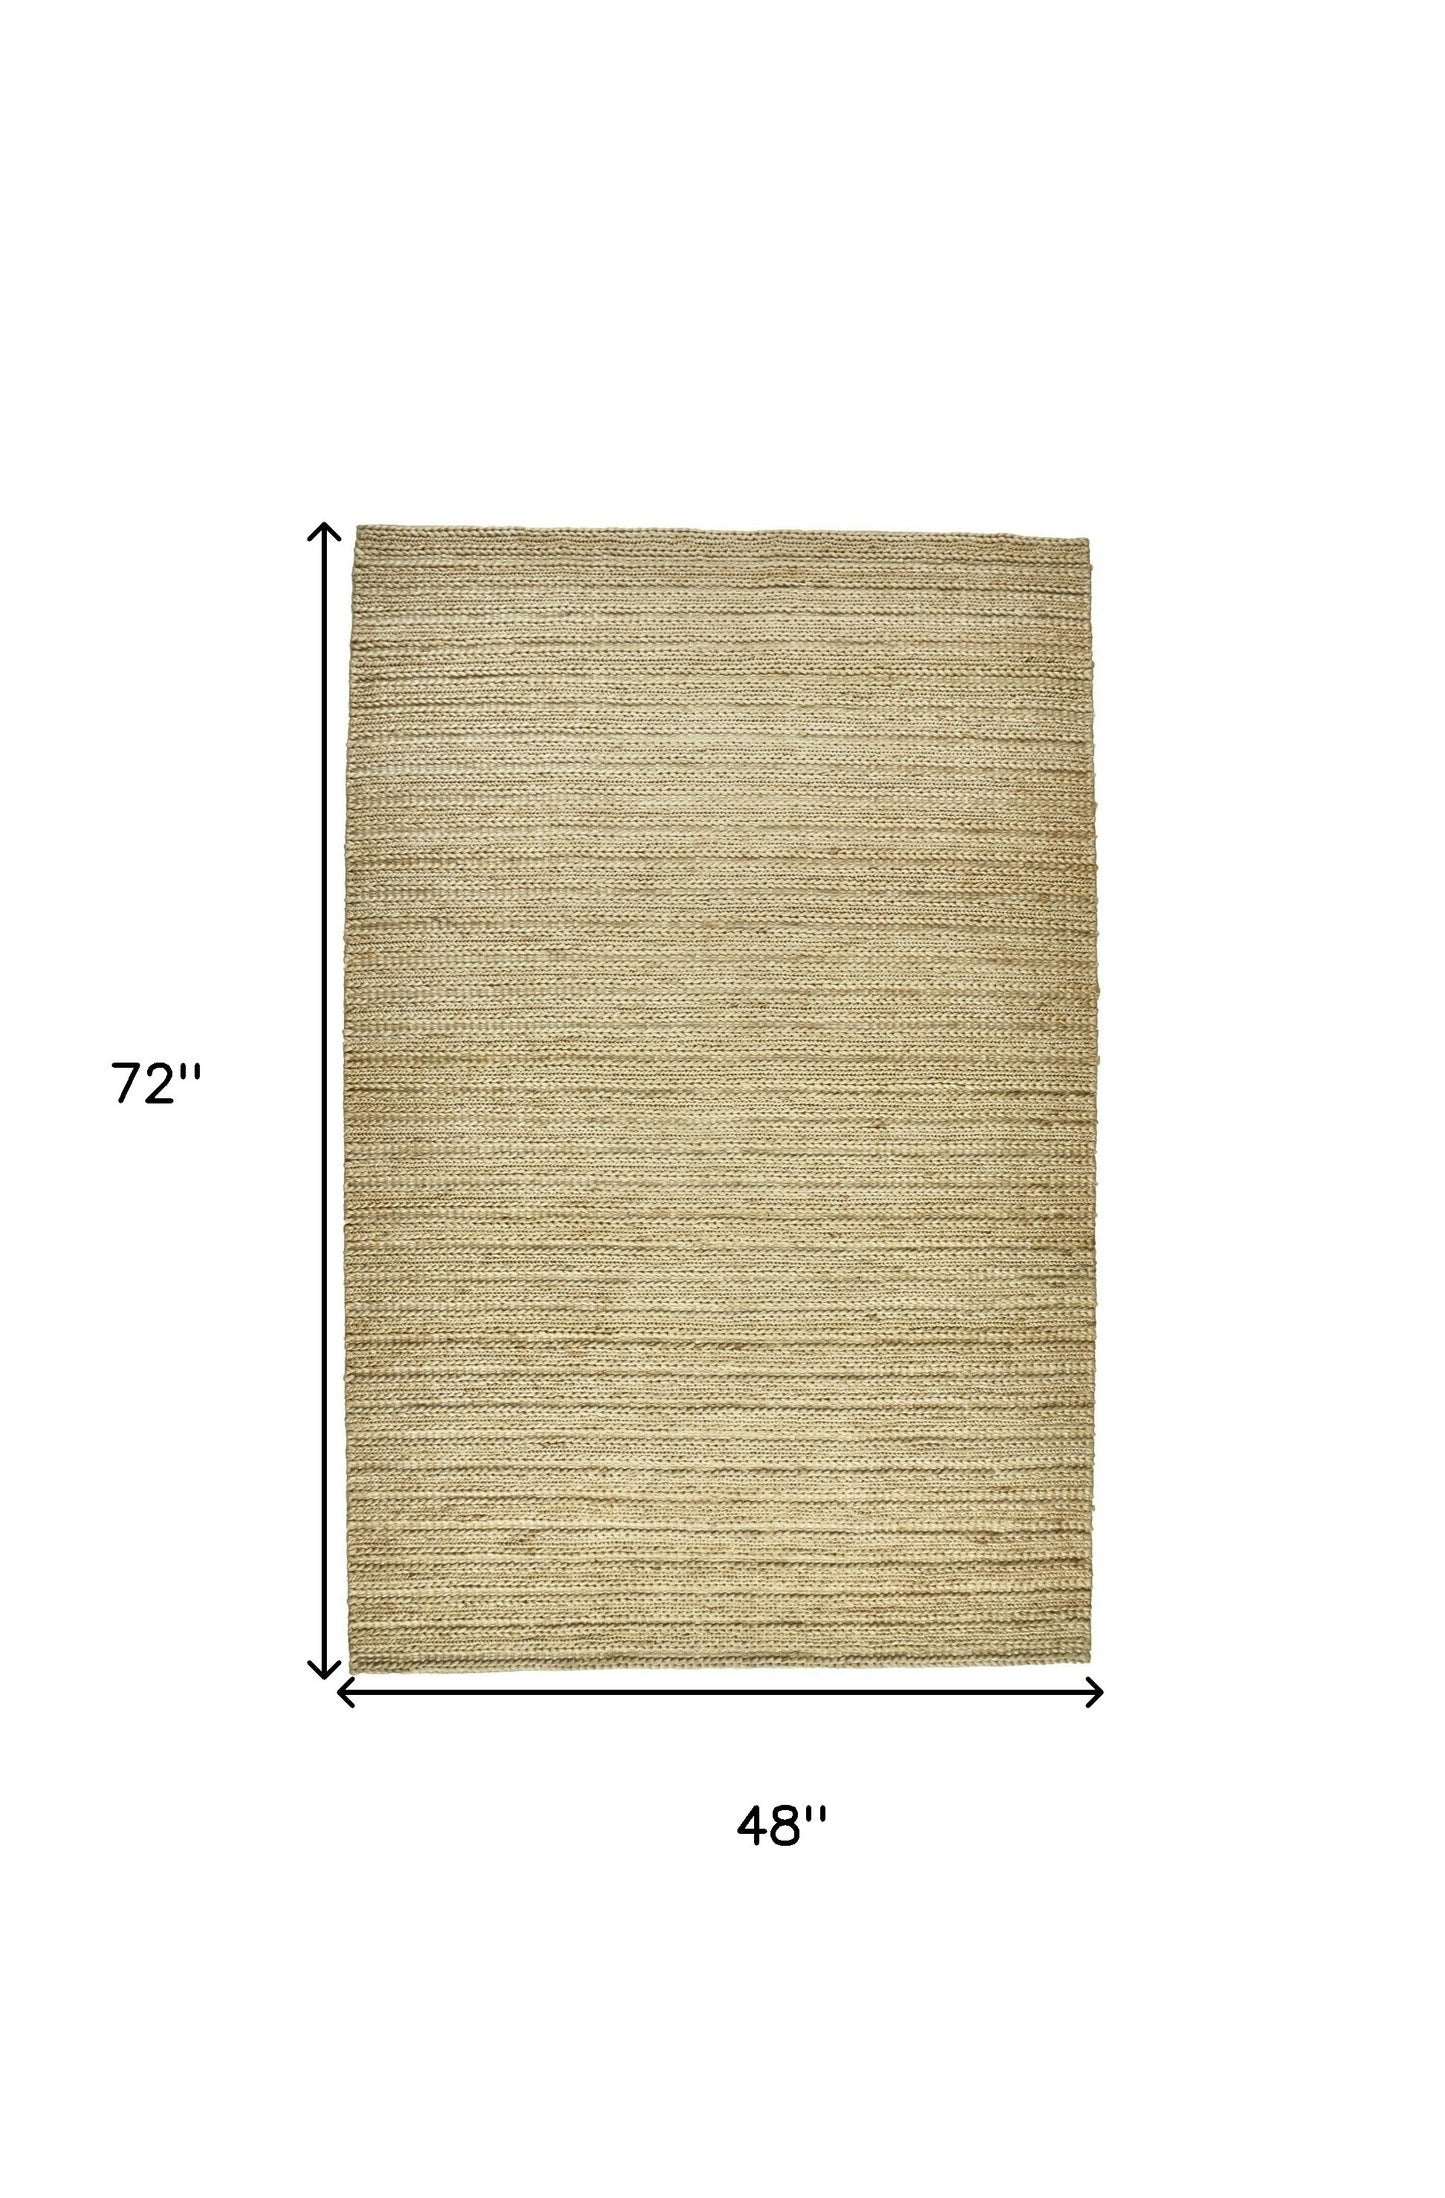 5' X 8' Tan Ivory And Taupe Hand Woven Area Rug